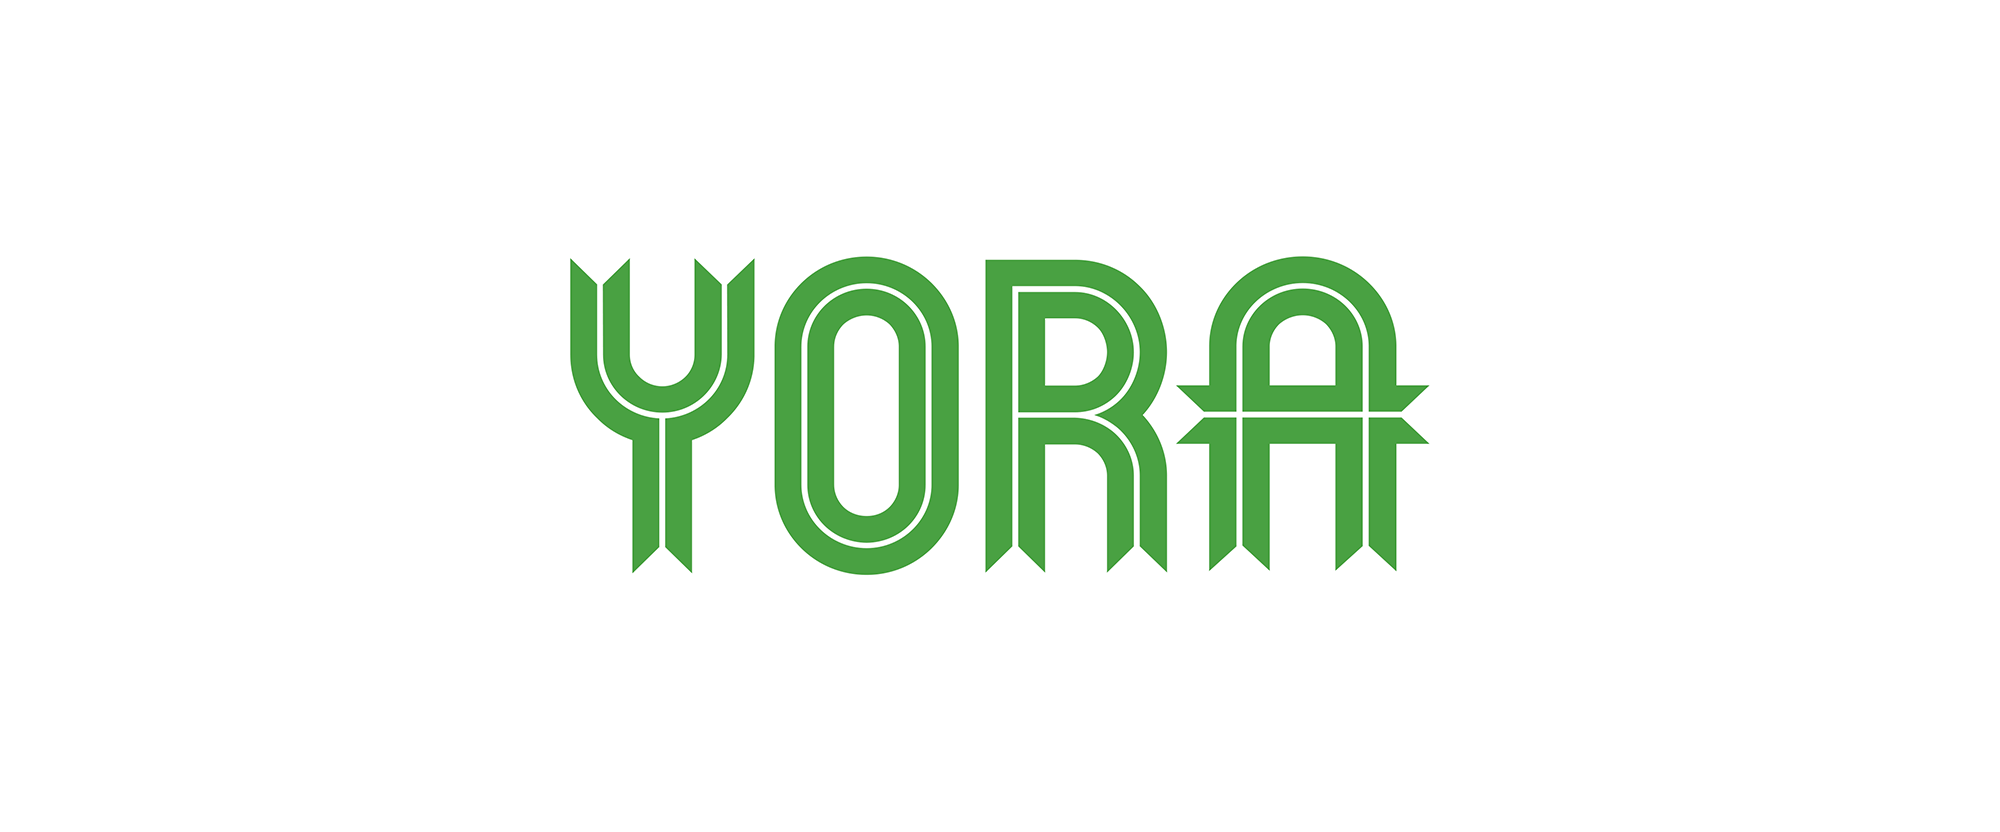 New Logo and Packaging for Yora by Junction Studio